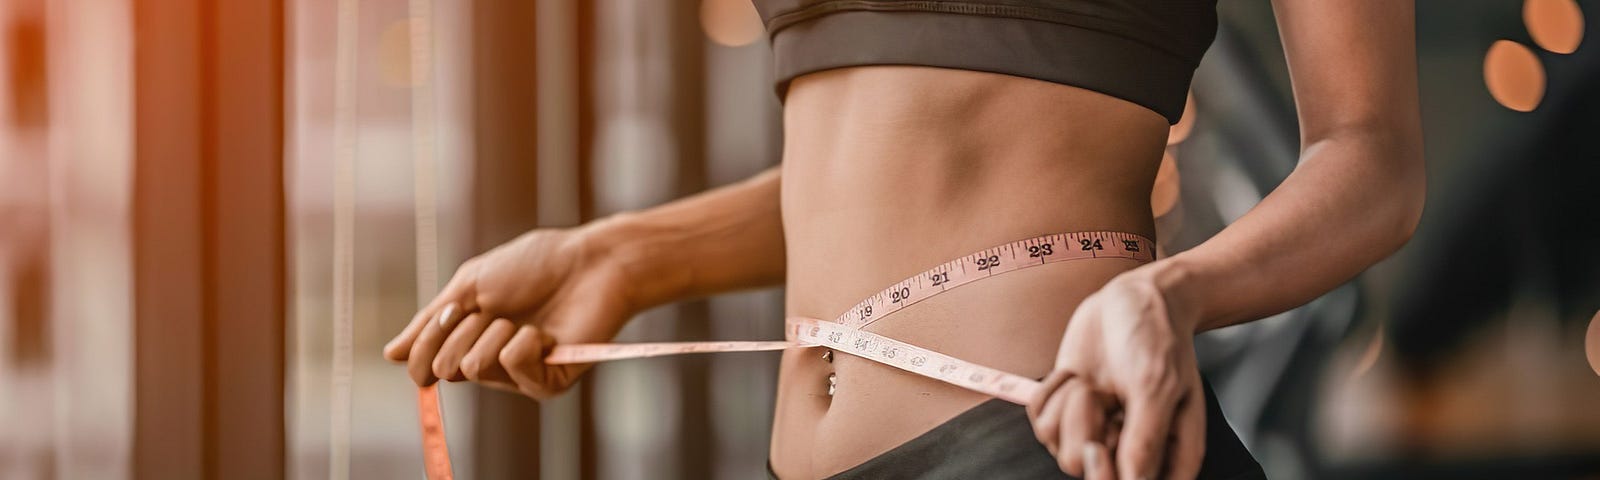 A thin woman in gym clothes is measuring her waistline.